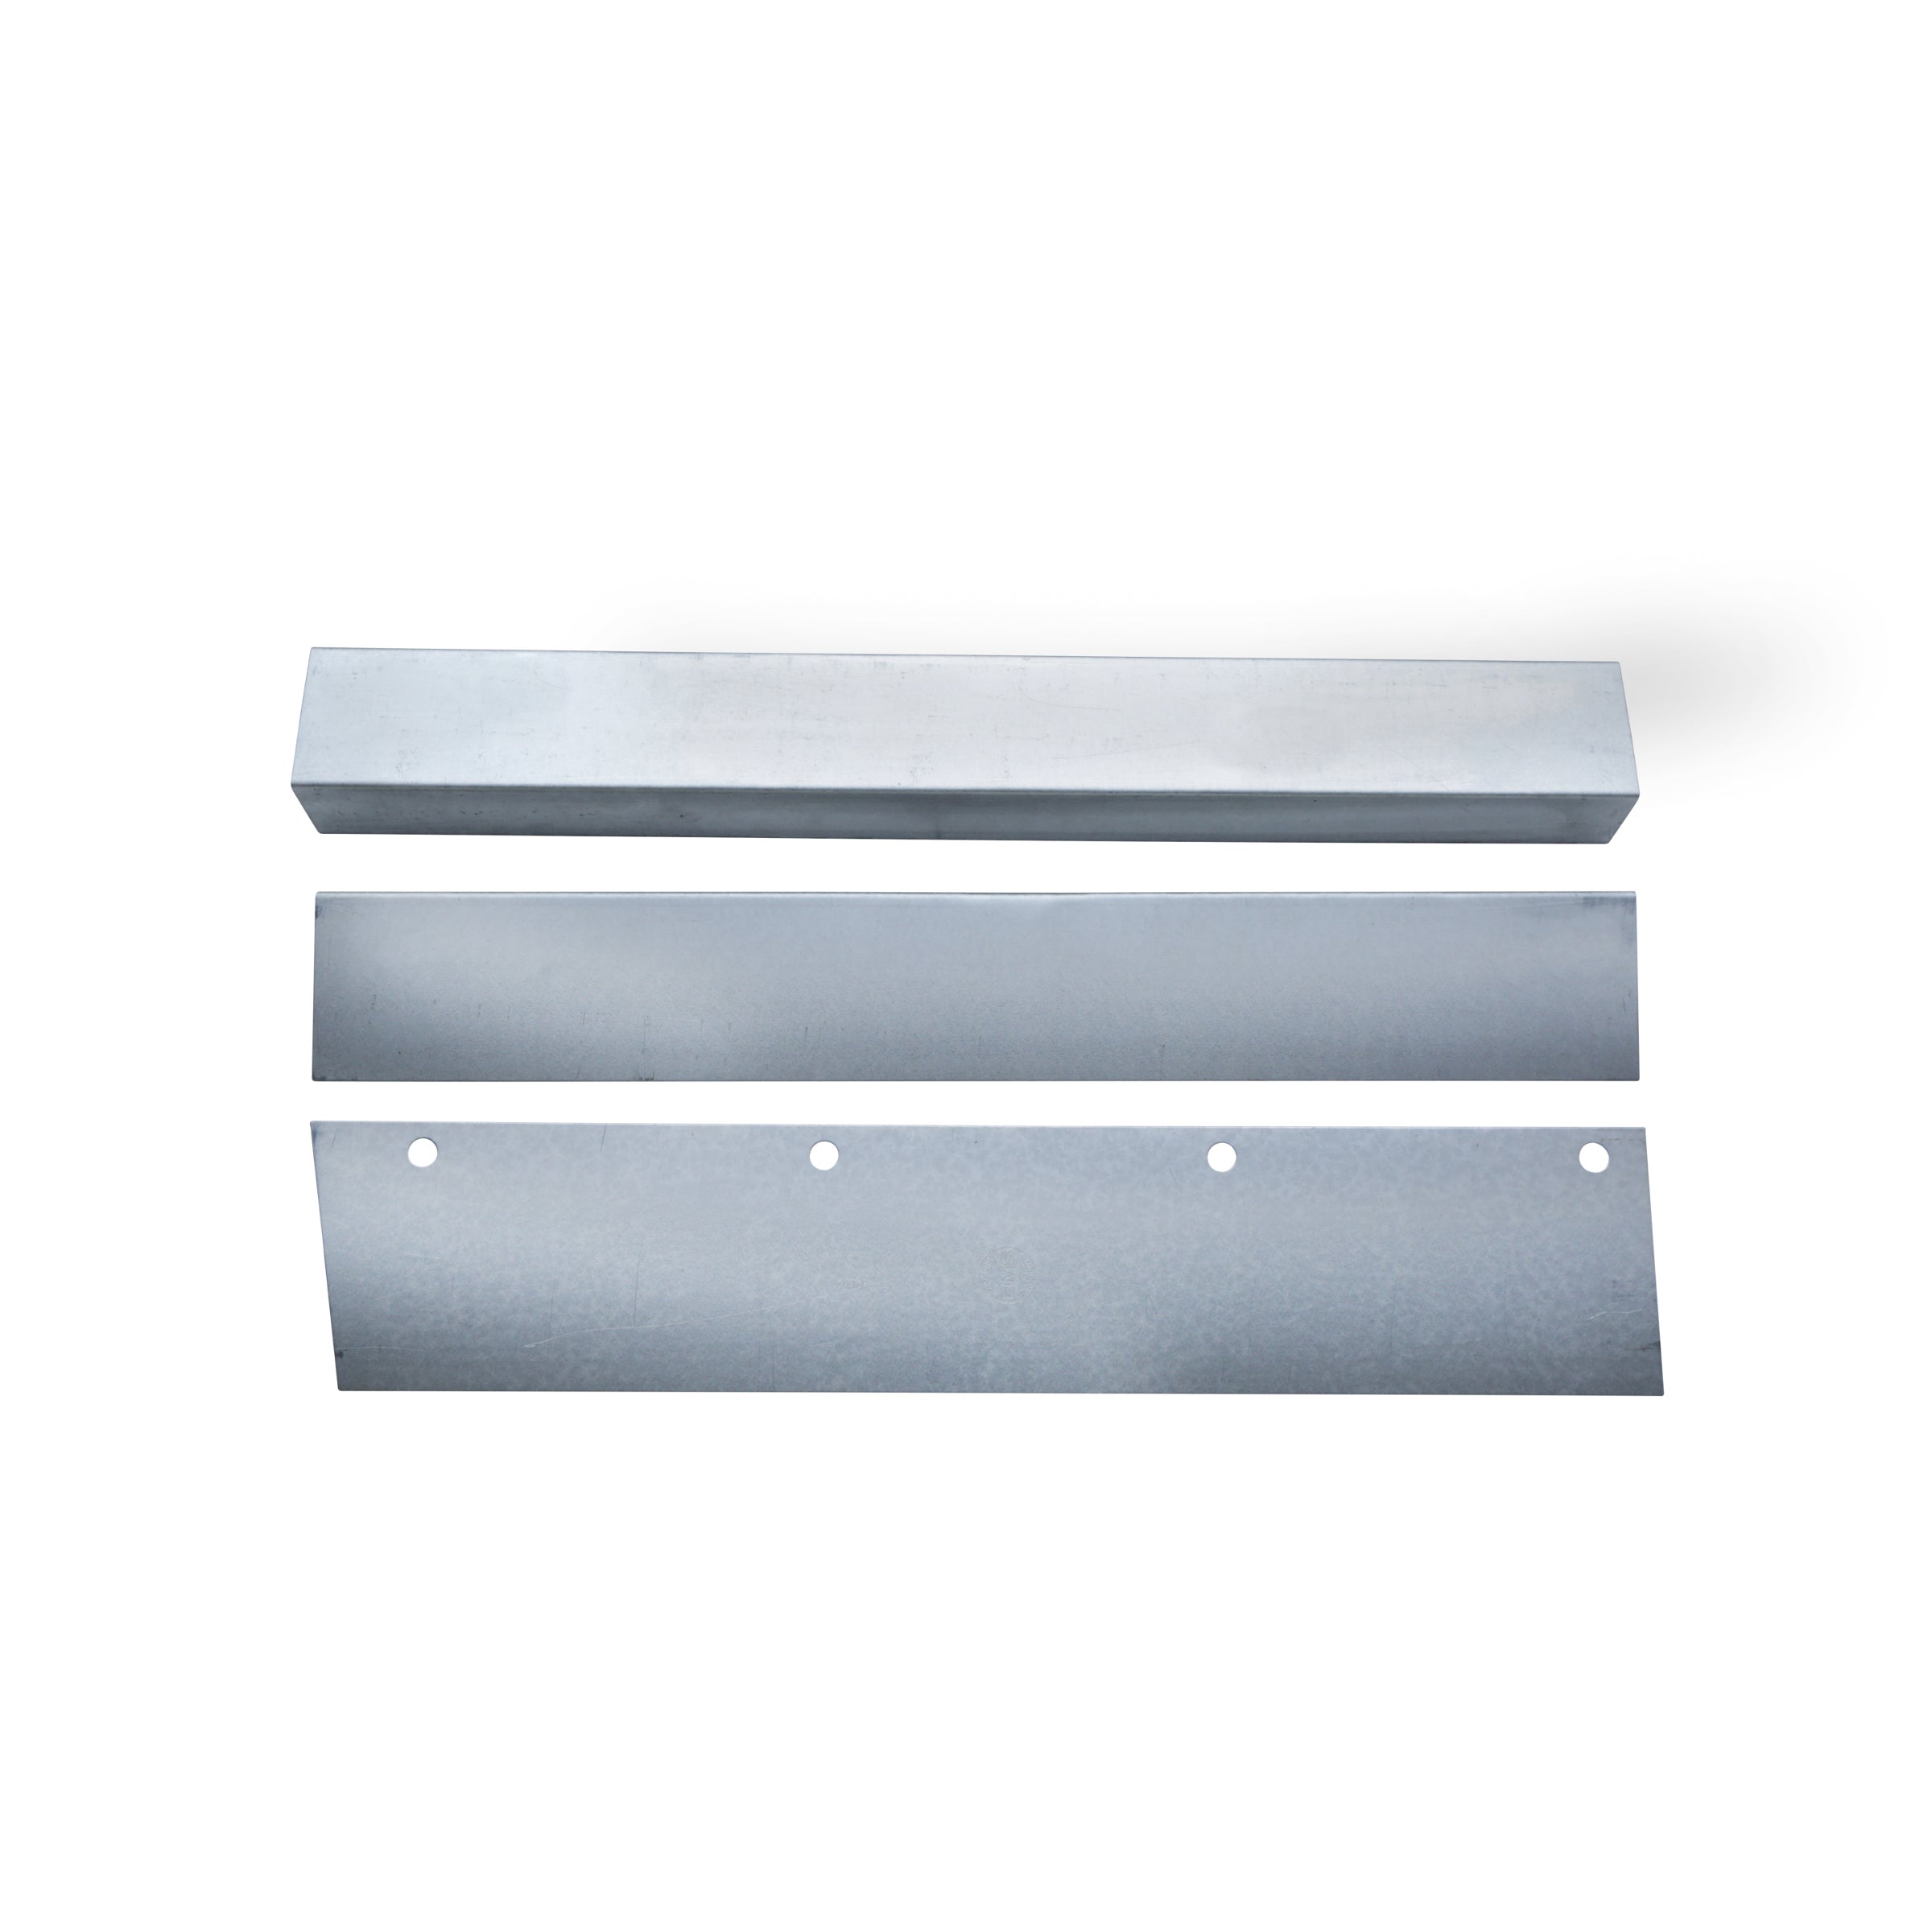 Rocker Panel Box (Rear, Right) • 1941-48 Ford & Mercury Fordor, Business Coupe, & Sedan Delivery